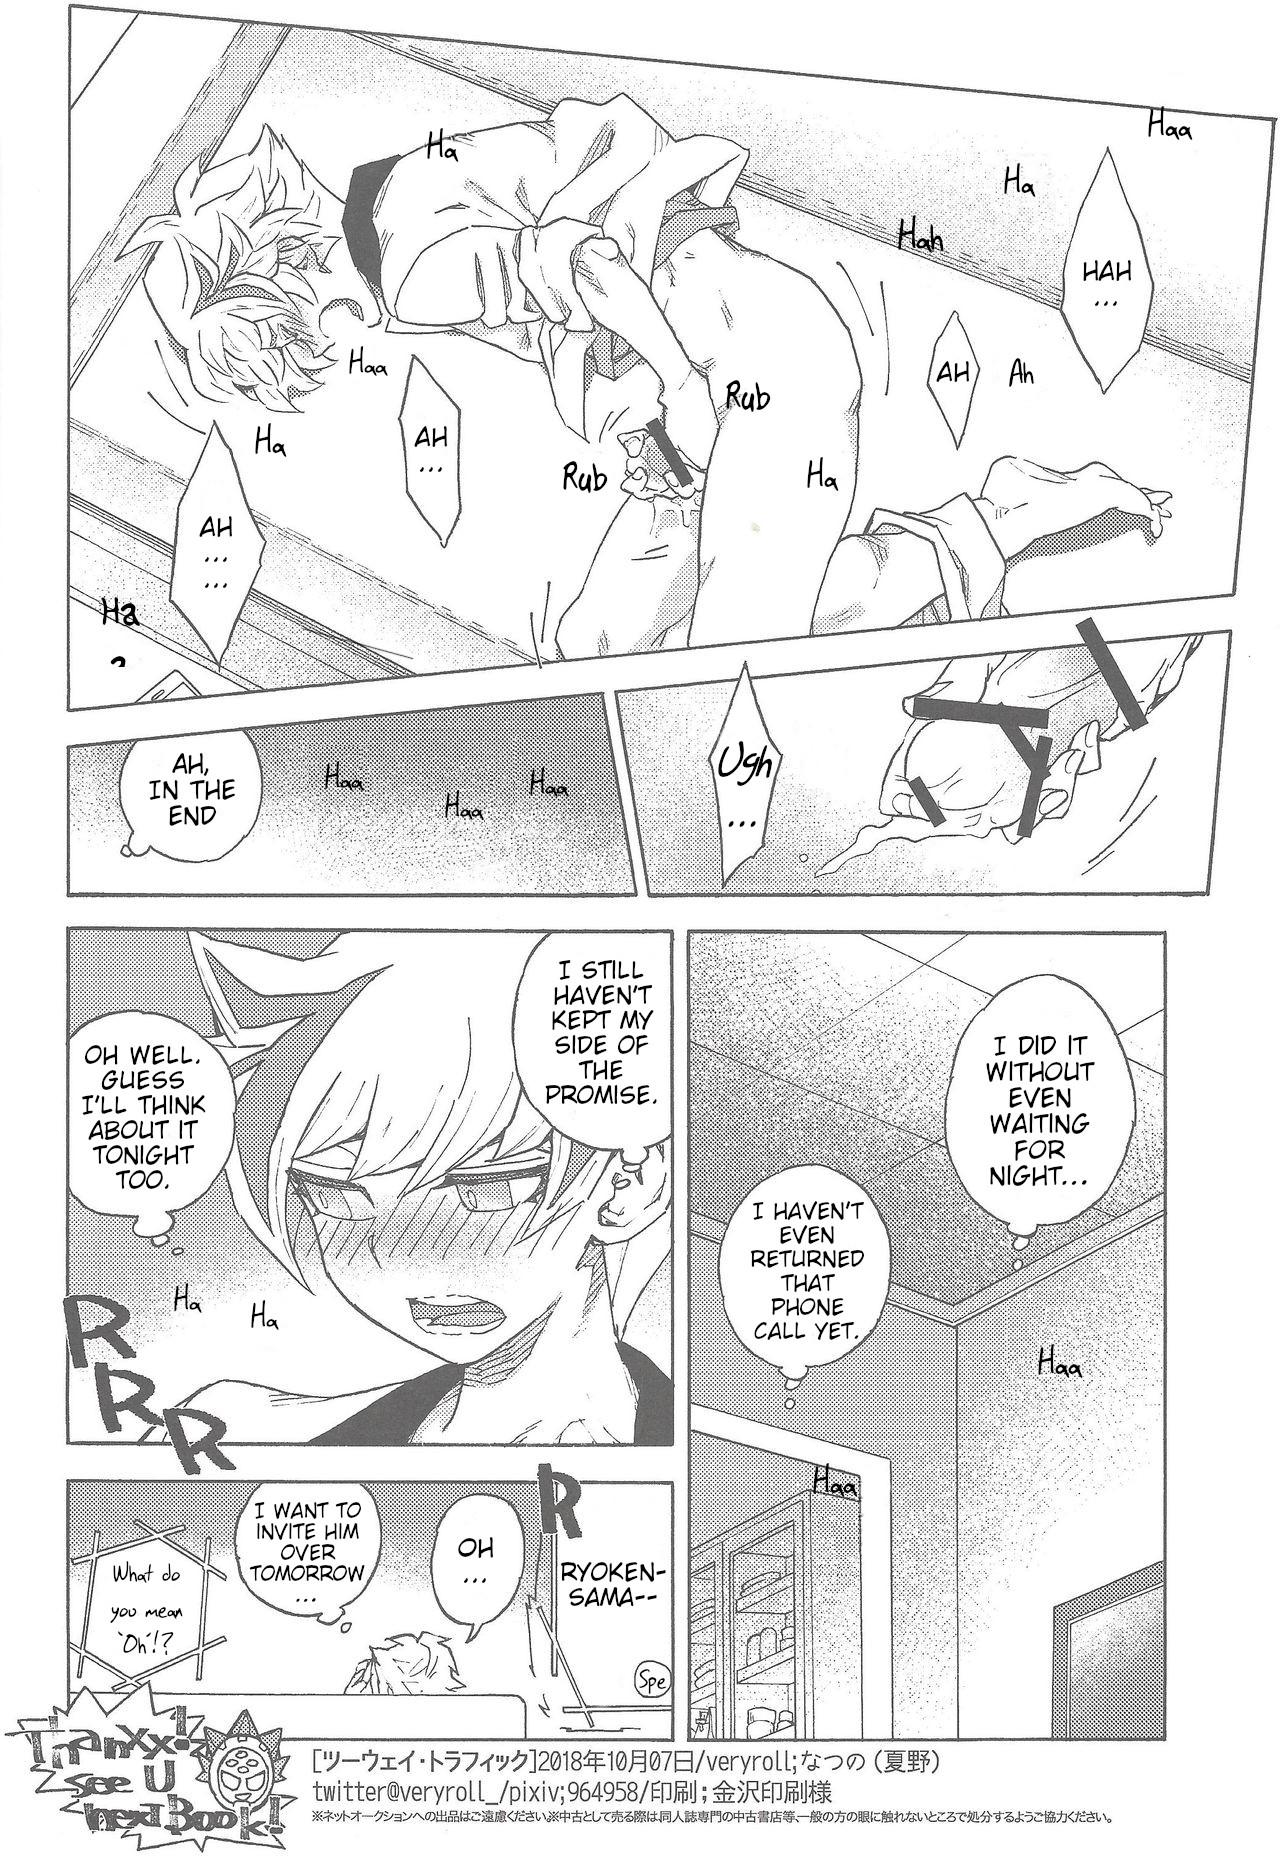 Naked twoway traffic - Yu-gi-oh vrains Big Ass - Page 25